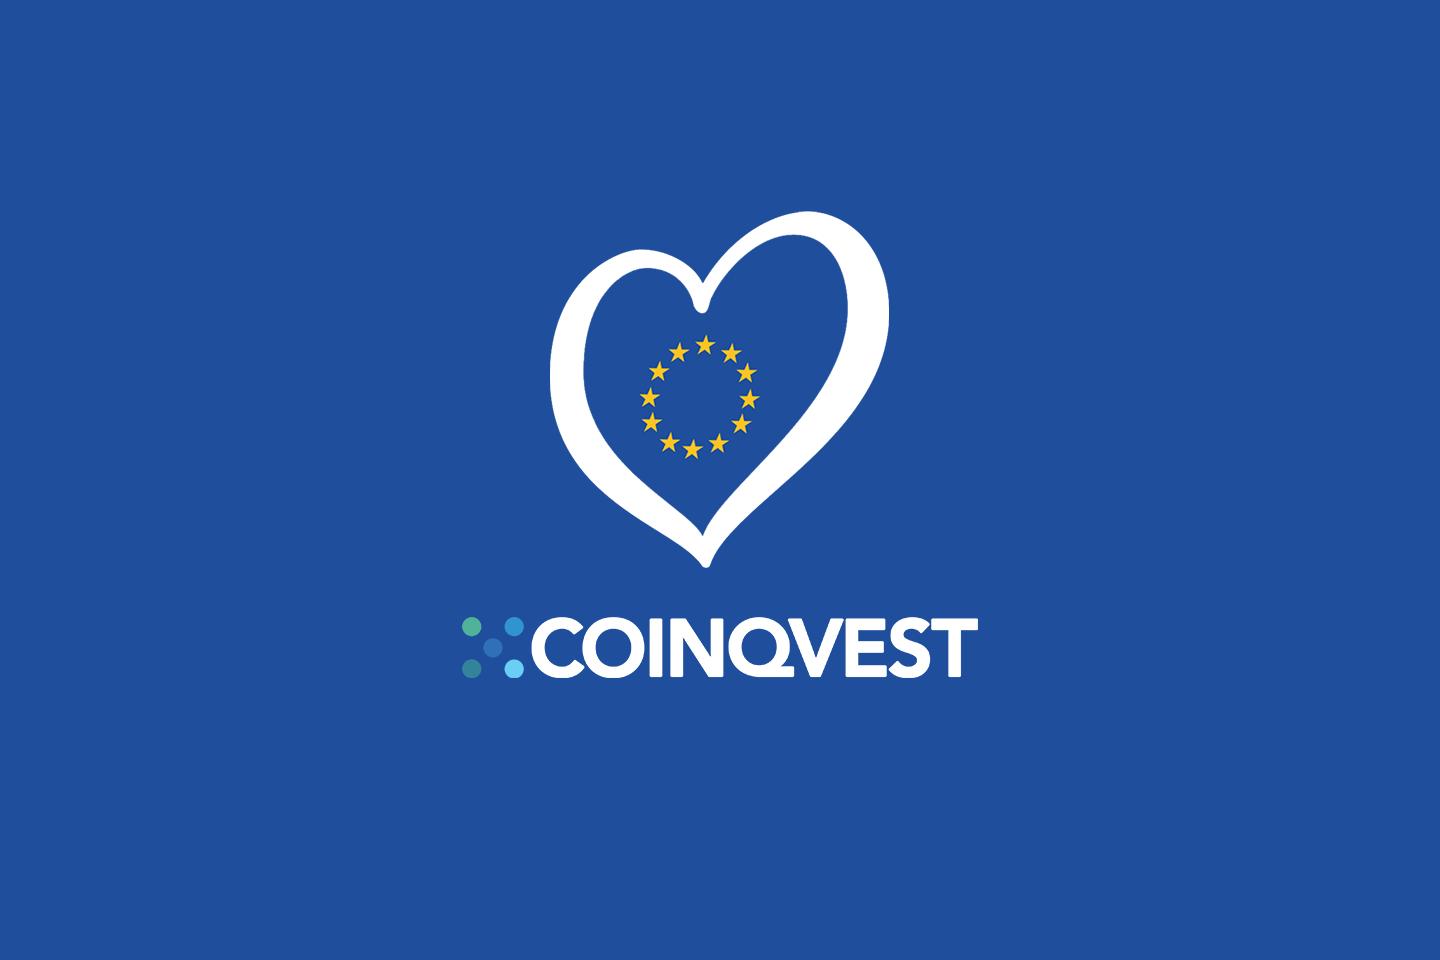 COINQVEST is now a Licensed and Regulated Virtual Currency Service in the EU